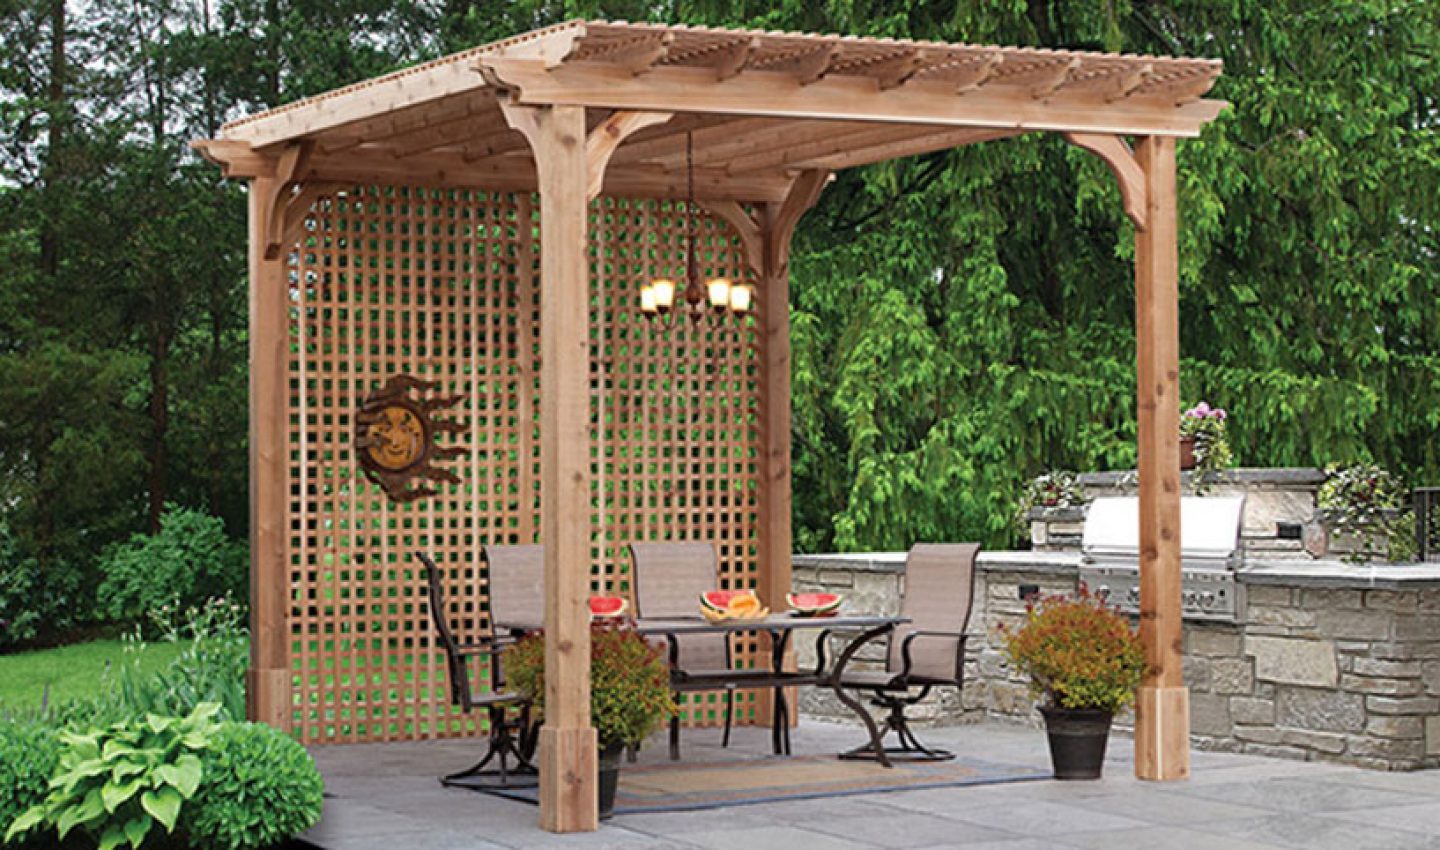 Outdoor Living Remodel Ideas to Make You Love Your Yard Again